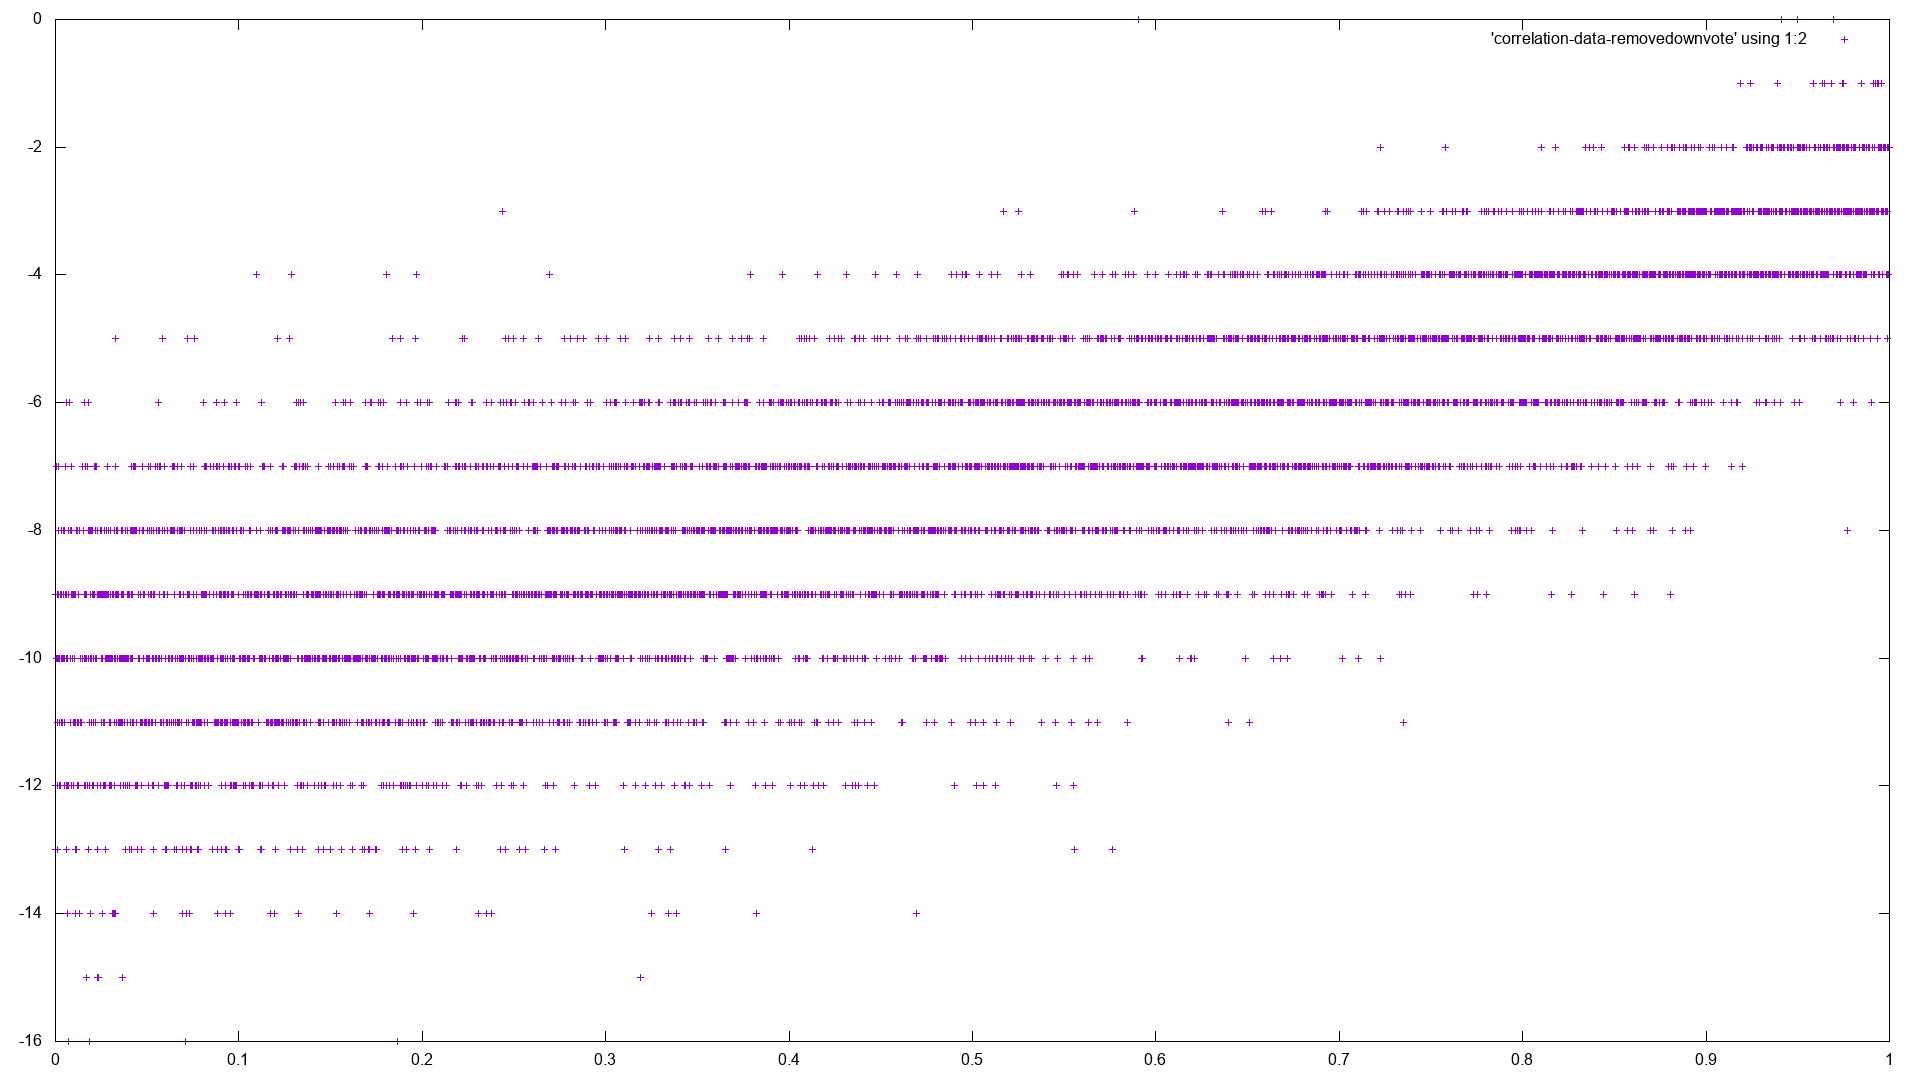 Scatterplot with quality on x-axis (0-1) and upvotes on y-axis (-16 - 0). The points roughly describe a thick fuzzy line from (0 quality,-11 upvotes) to about (1 quality, -3 downvotes). There are almost no points in the area below the line (high quality, many downvotes). The shape looks very similar to the one with only downvotes.